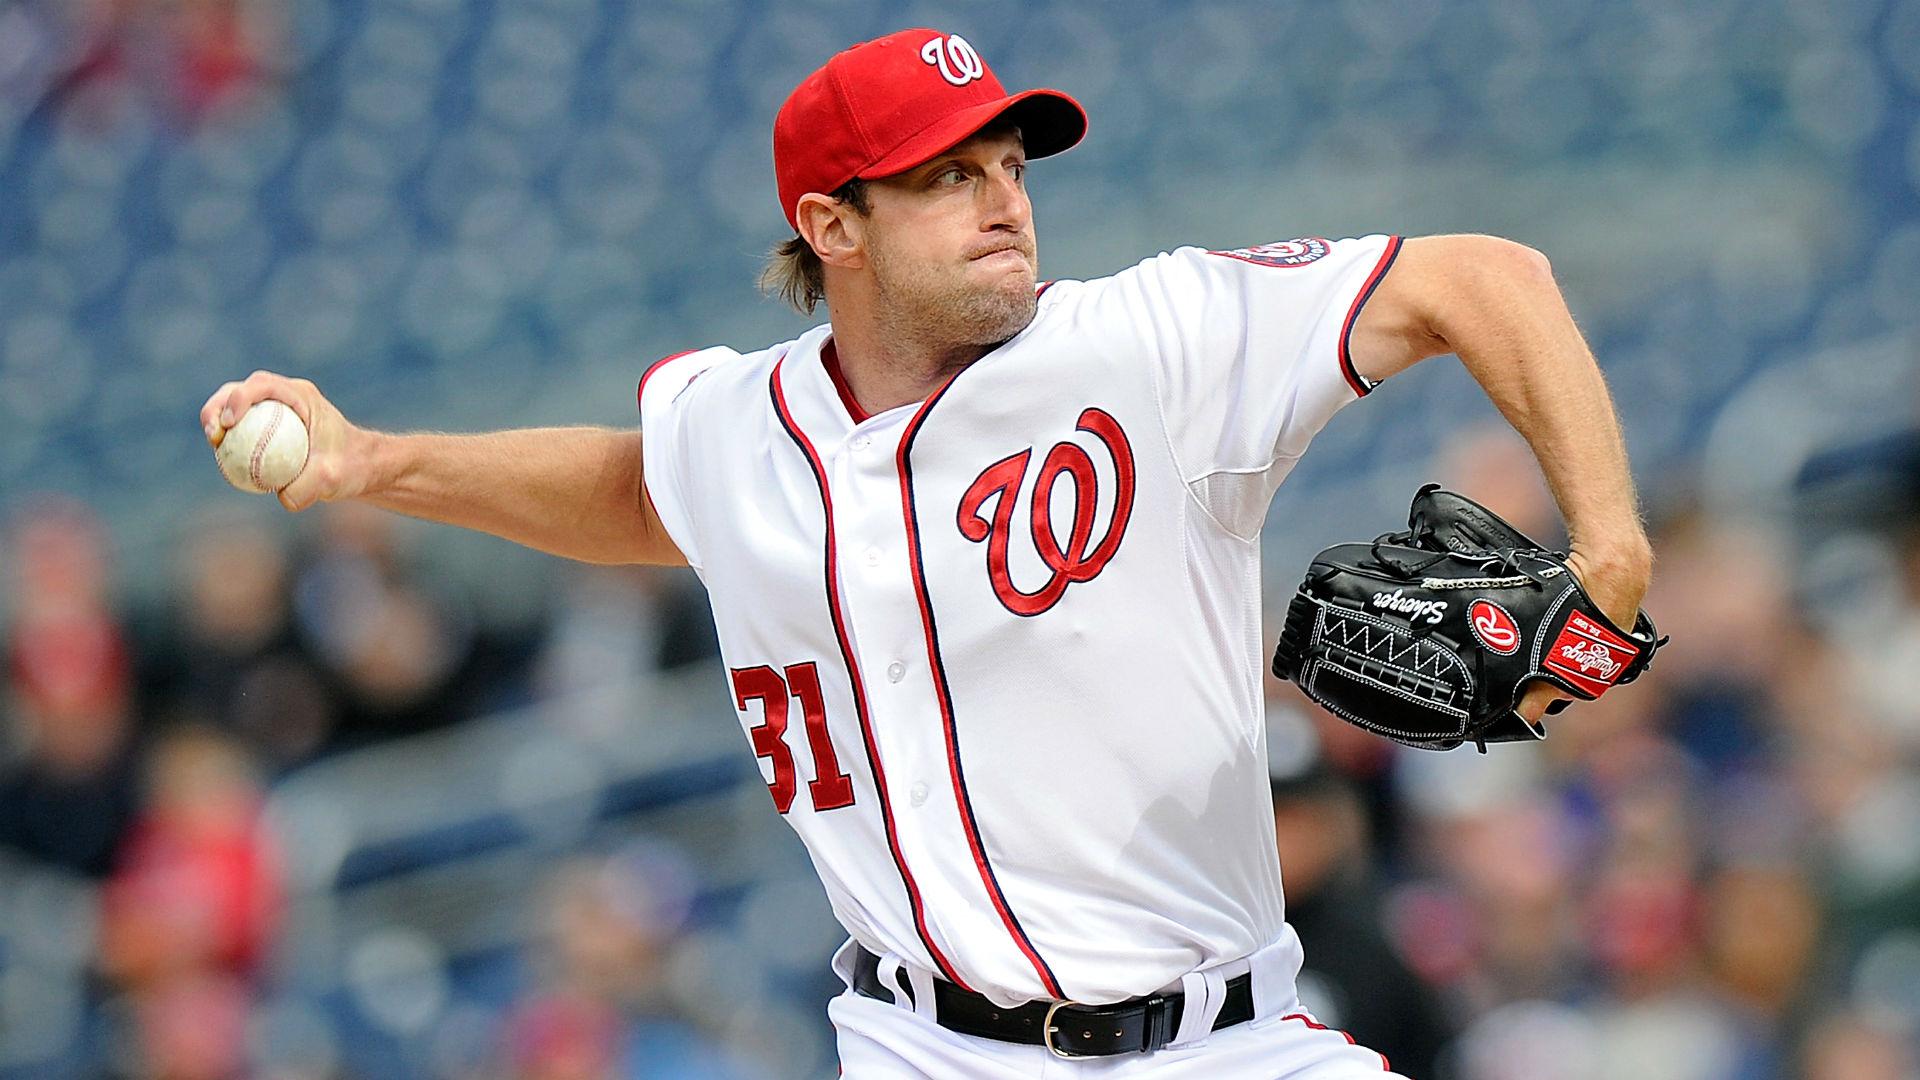 Max Scherzer backtracks on DH comments, says he's a 'fun